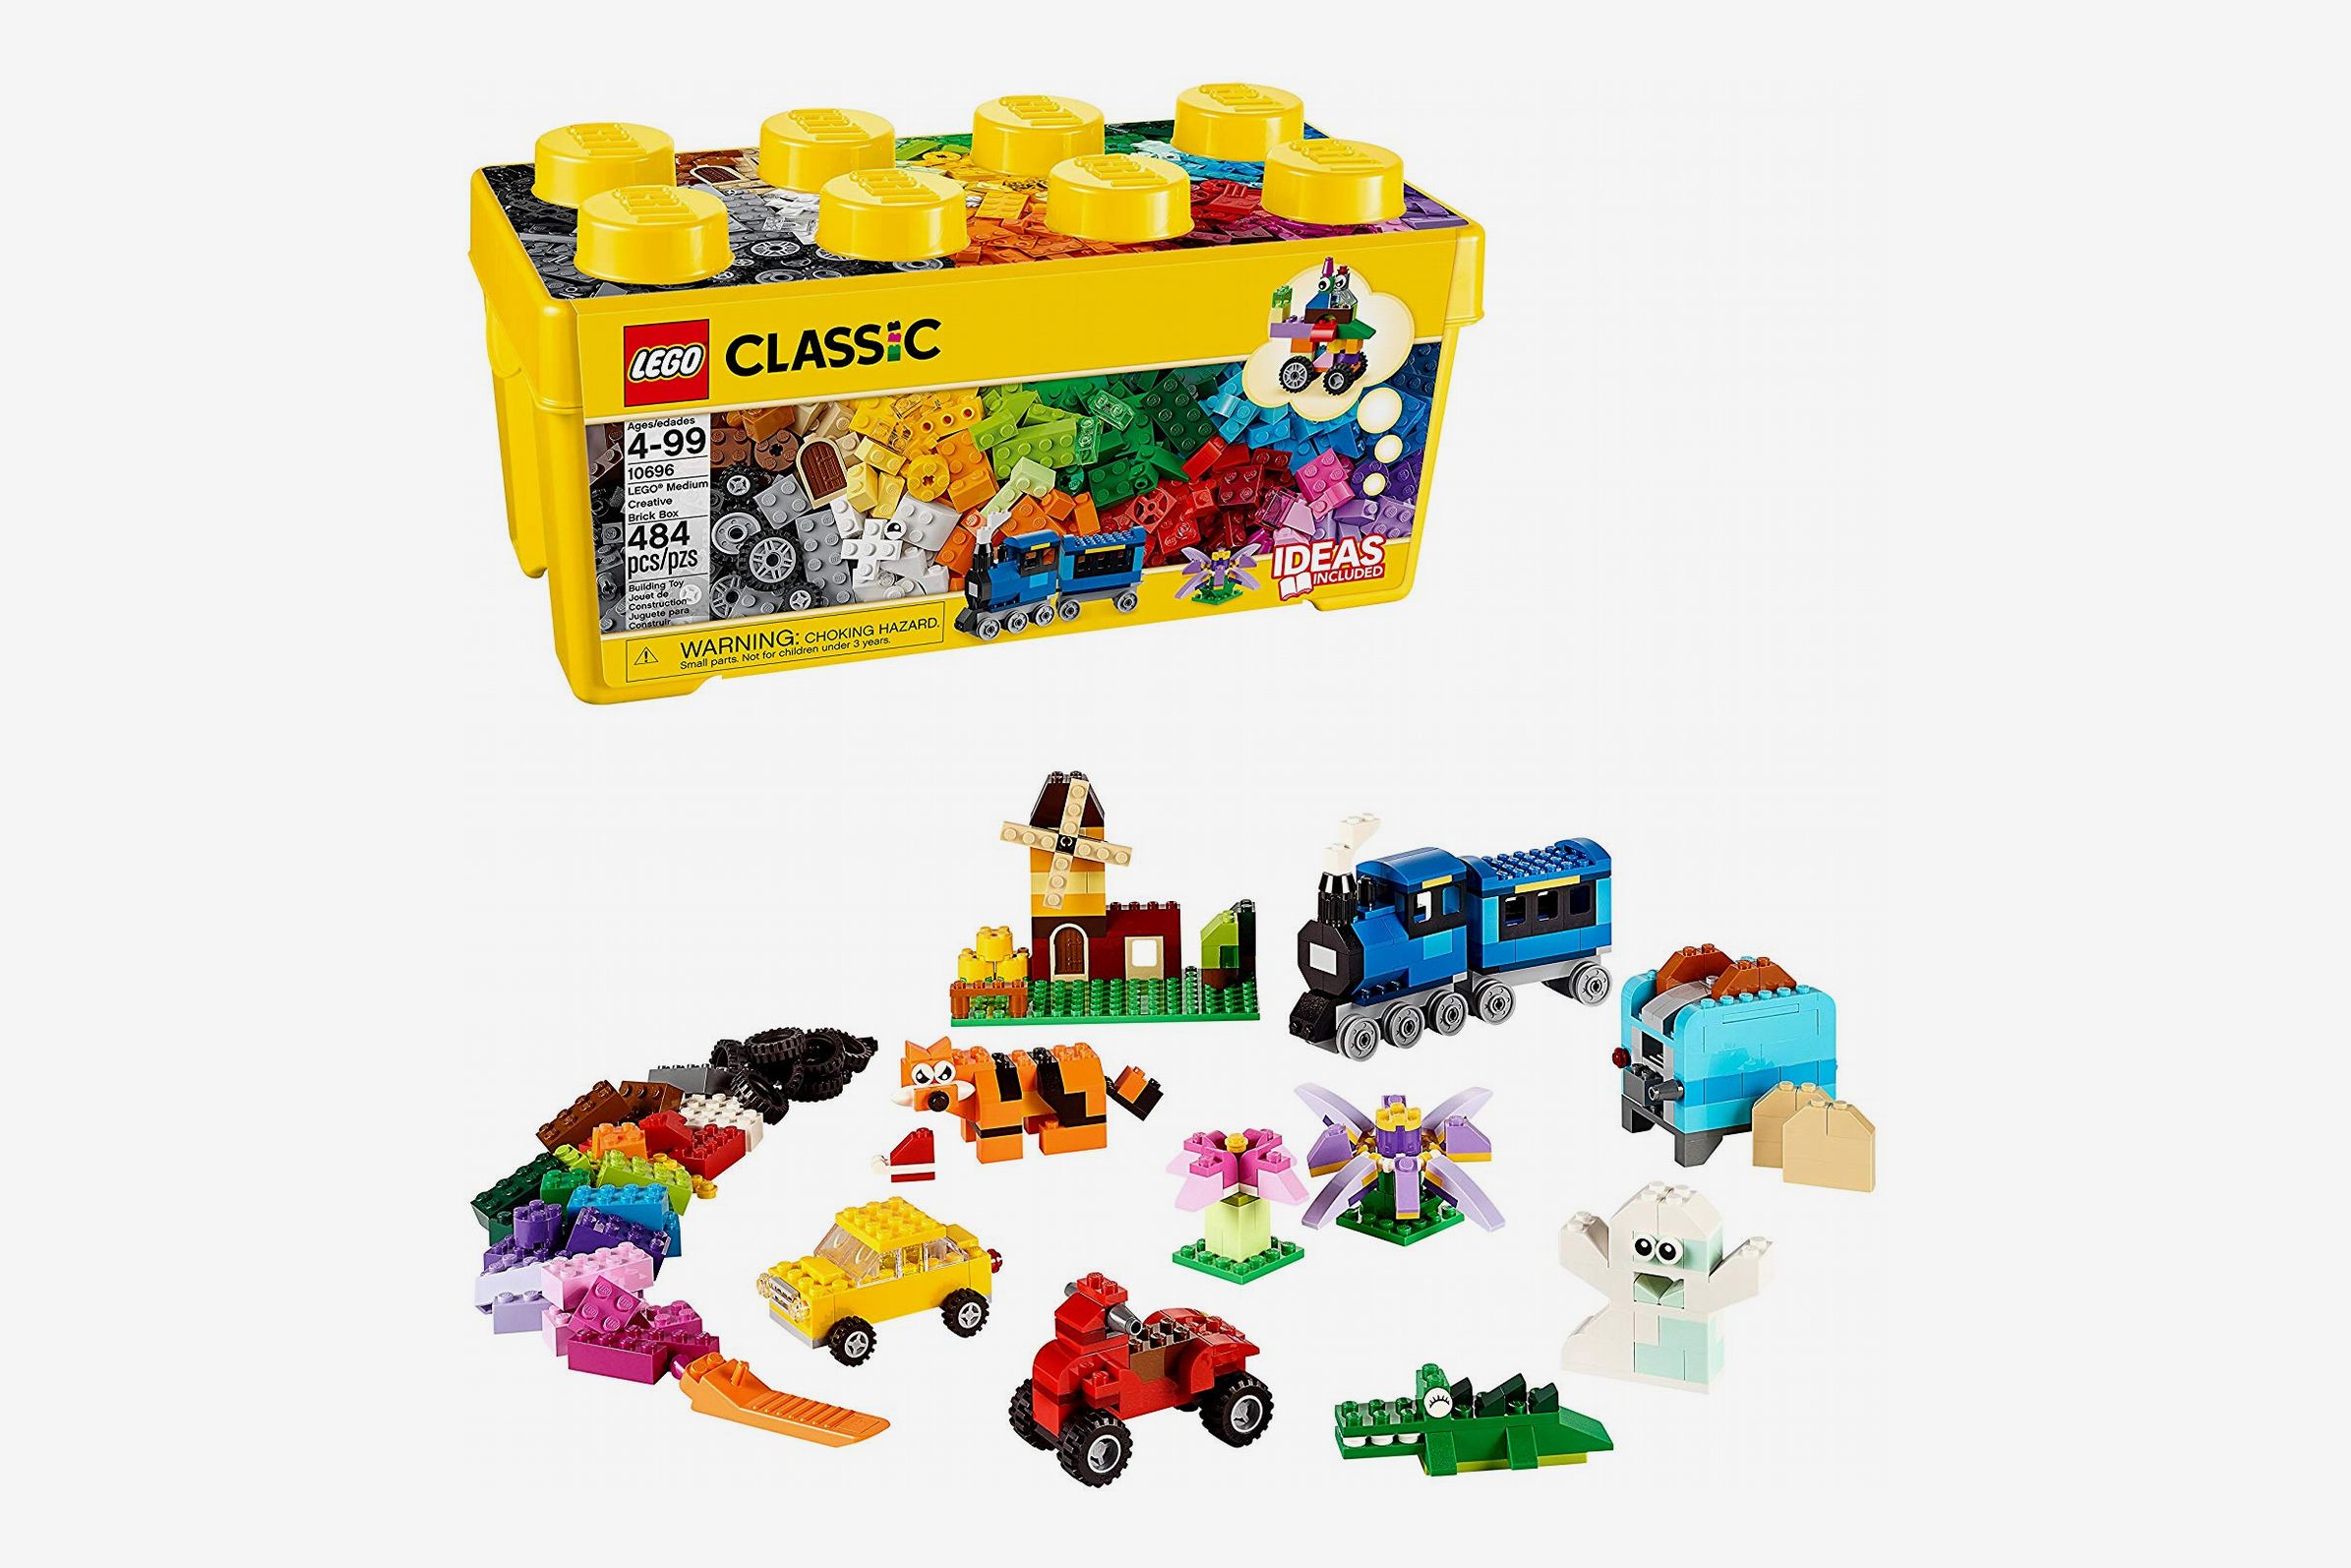 16 Best Creative Toys for Kids - 2020 | The Strategist